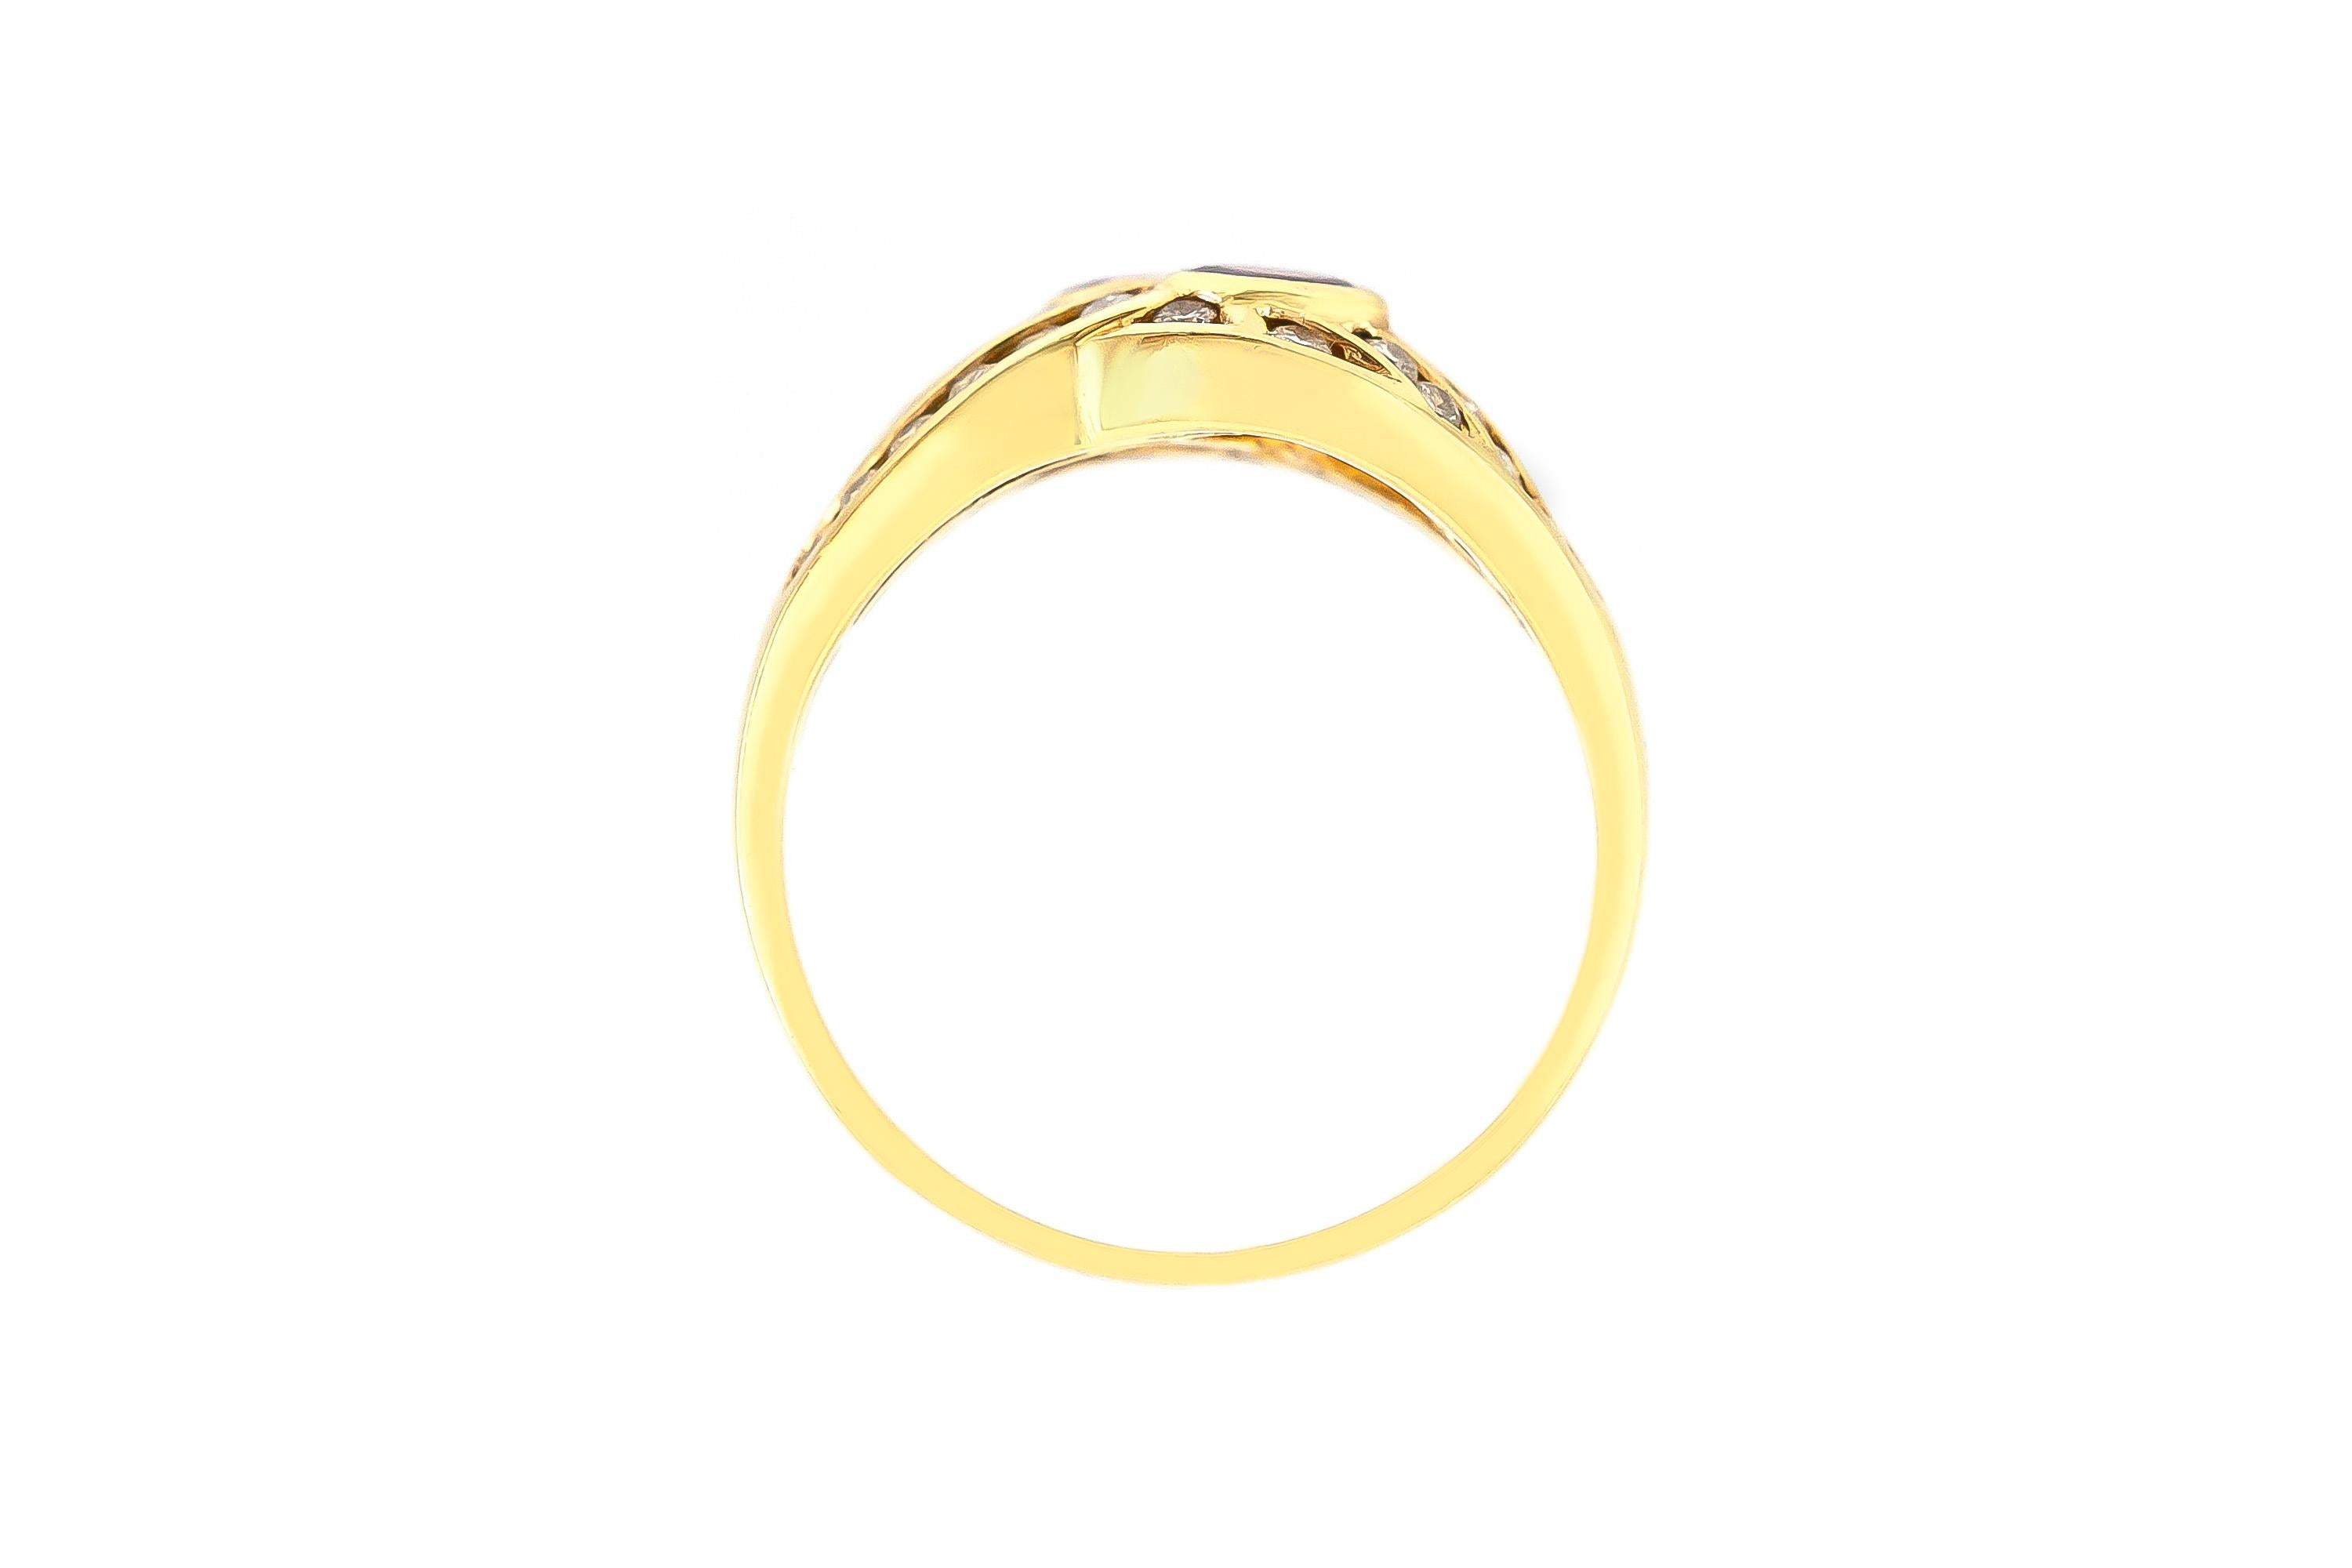 The ring is finely crafted in 18k yellow gold with diamonds weighing approximately total of 0.68 carat and rubies weighing approximately total of 0.58 carat.
Circa 1980.